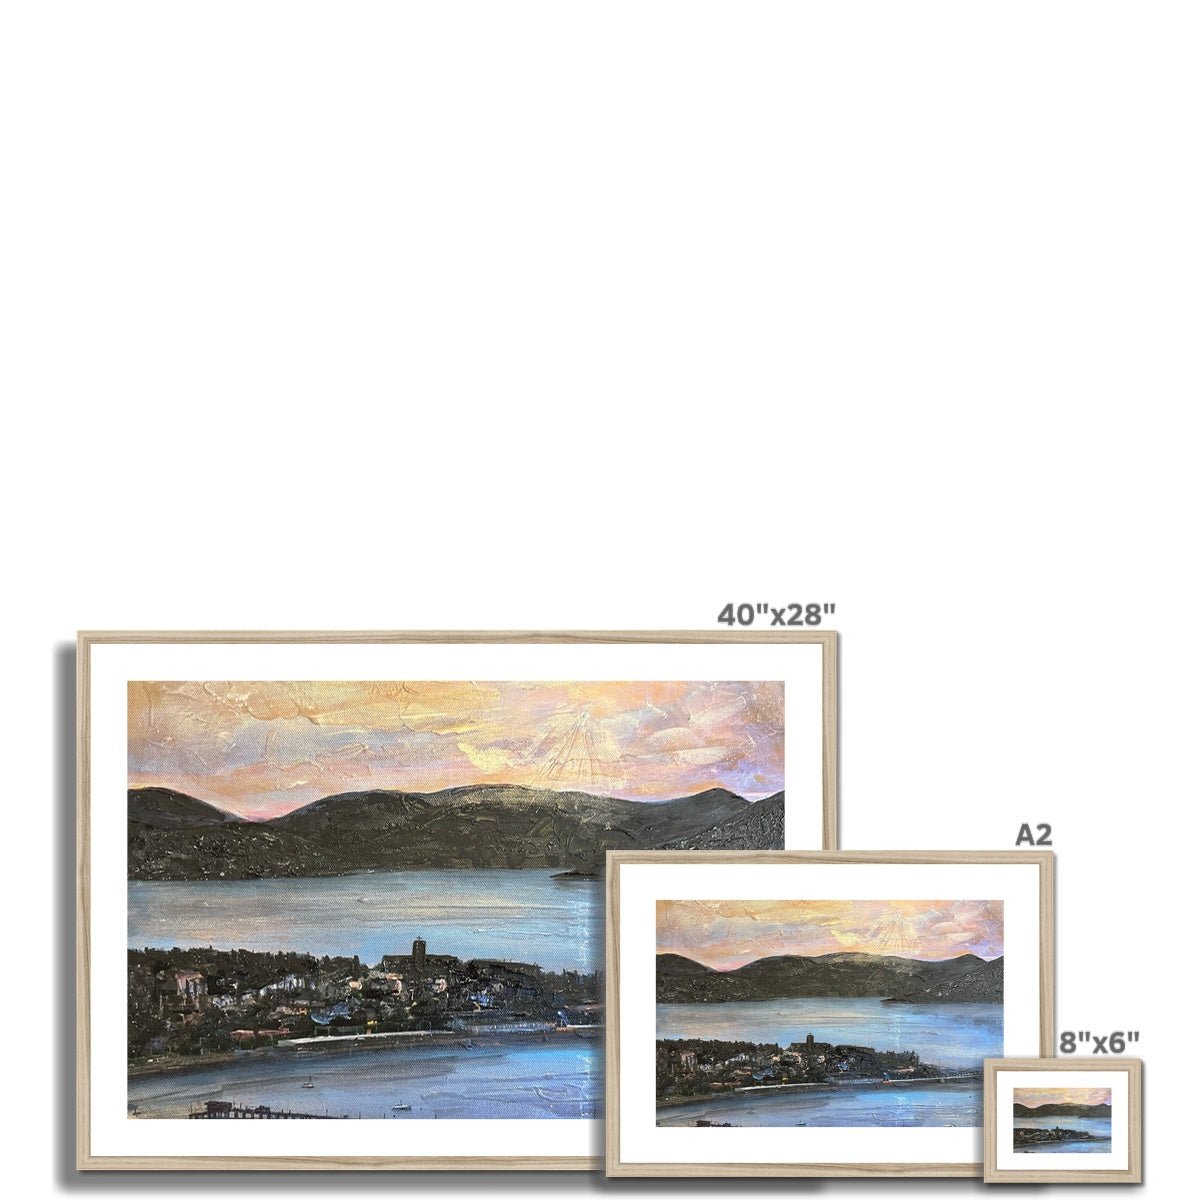 From Lyle Hill Painting | Framed & Mounted Prints From Scotland-Framed & Mounted Prints-River Clyde Art Gallery-Paintings, Prints, Homeware, Art Gifts From Scotland By Scottish Artist Kevin Hunter